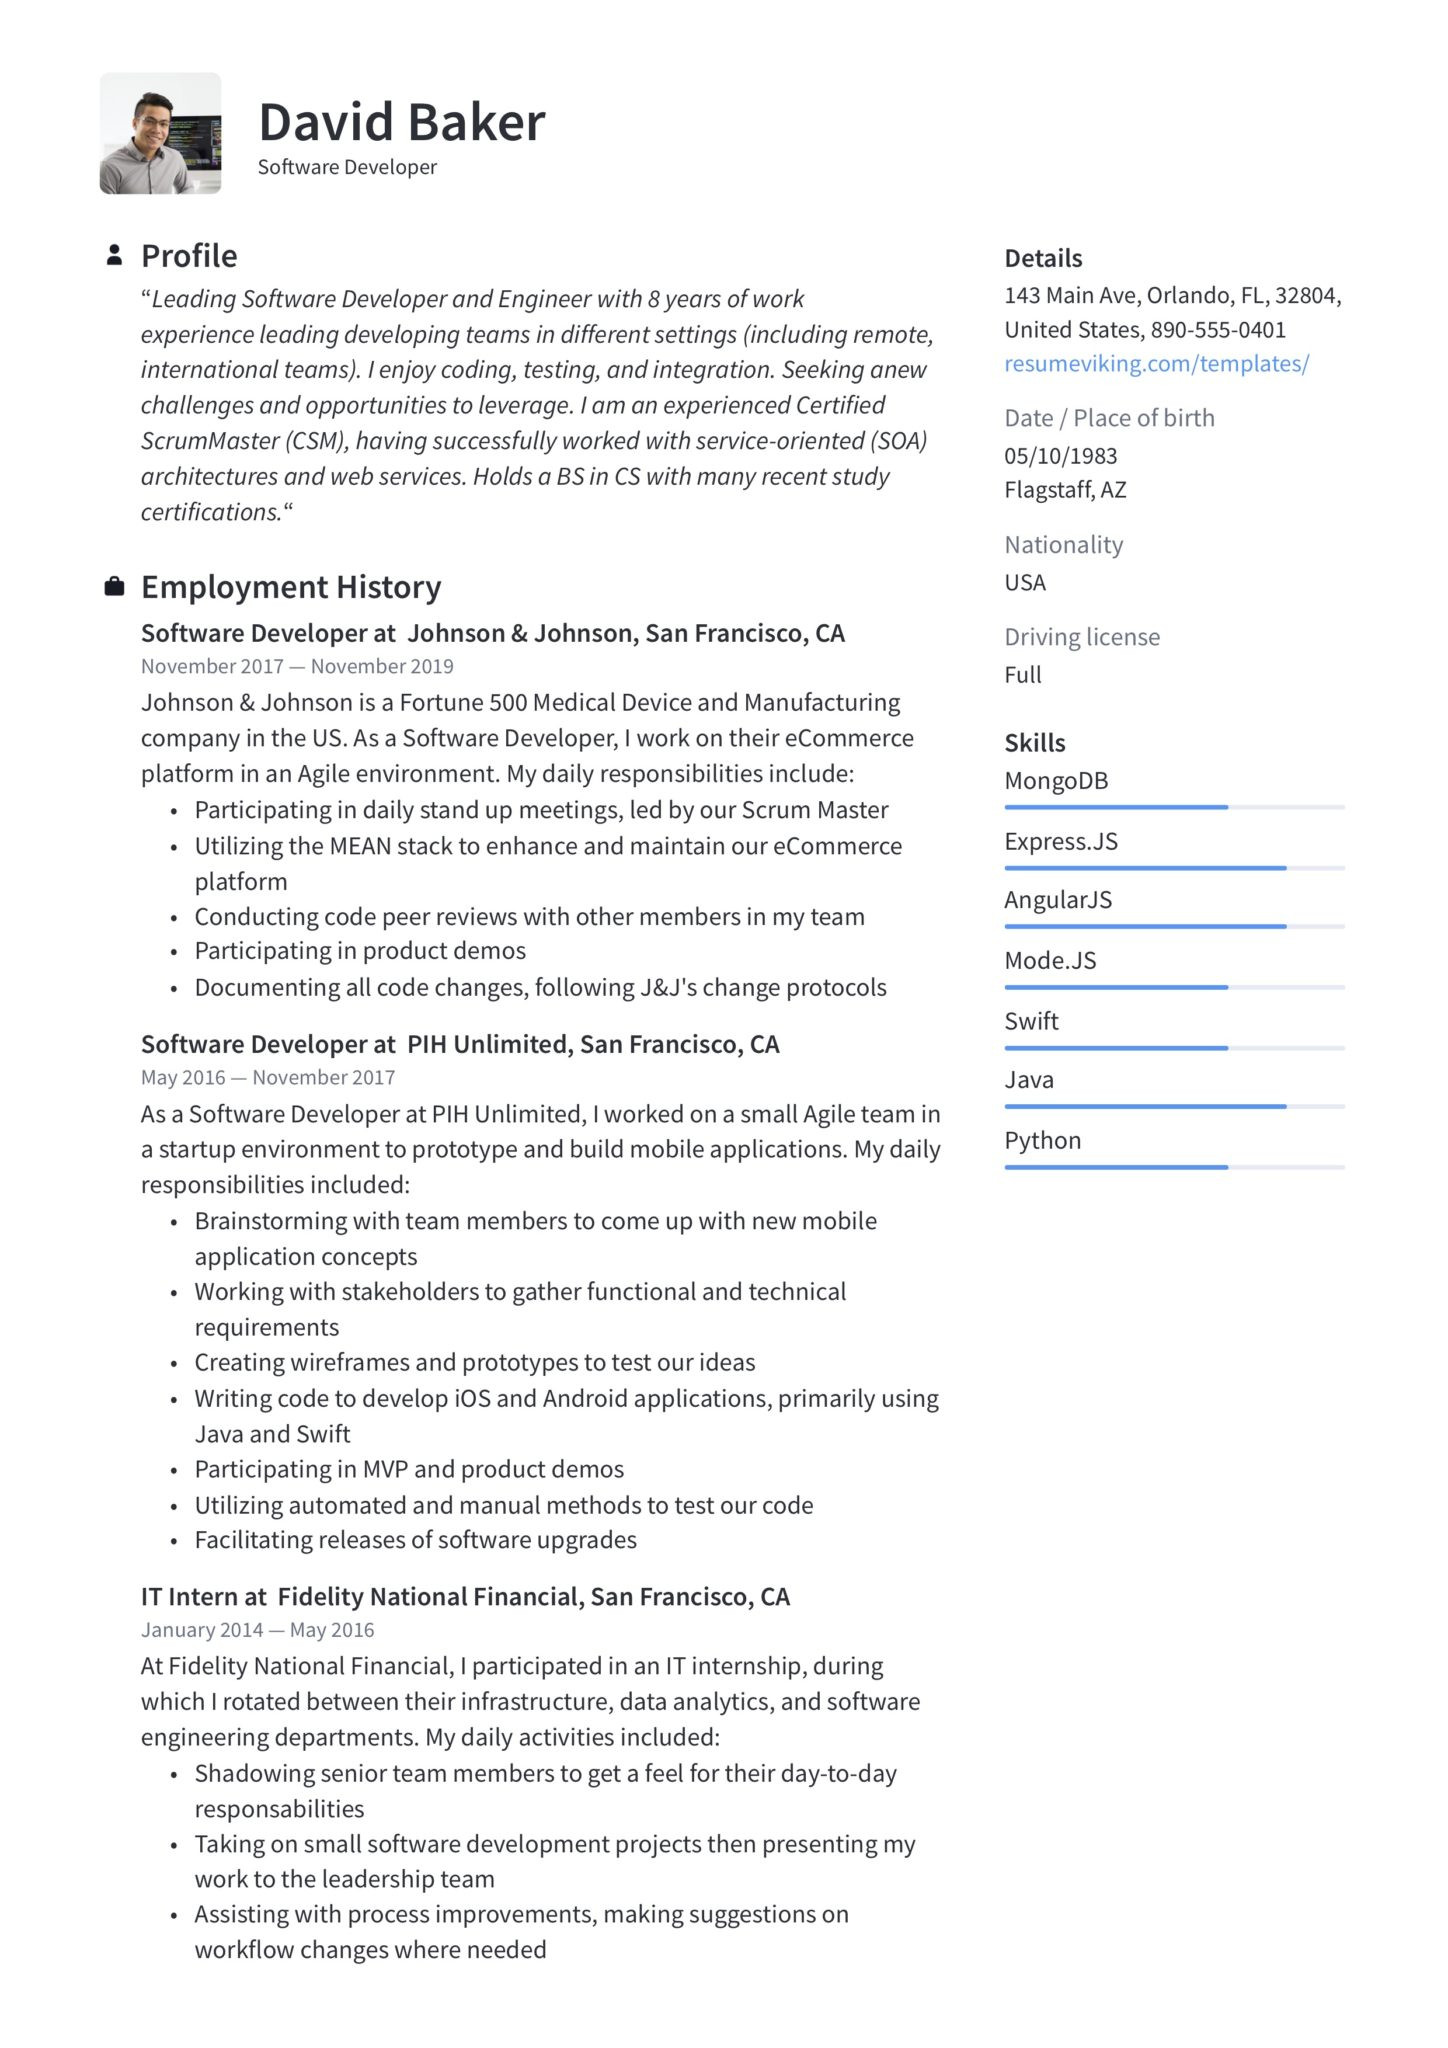 Sample Resume for software Engineer with 10 Years Experience Guide: software Developer Resume  19 Examples Word & Pdf 2020